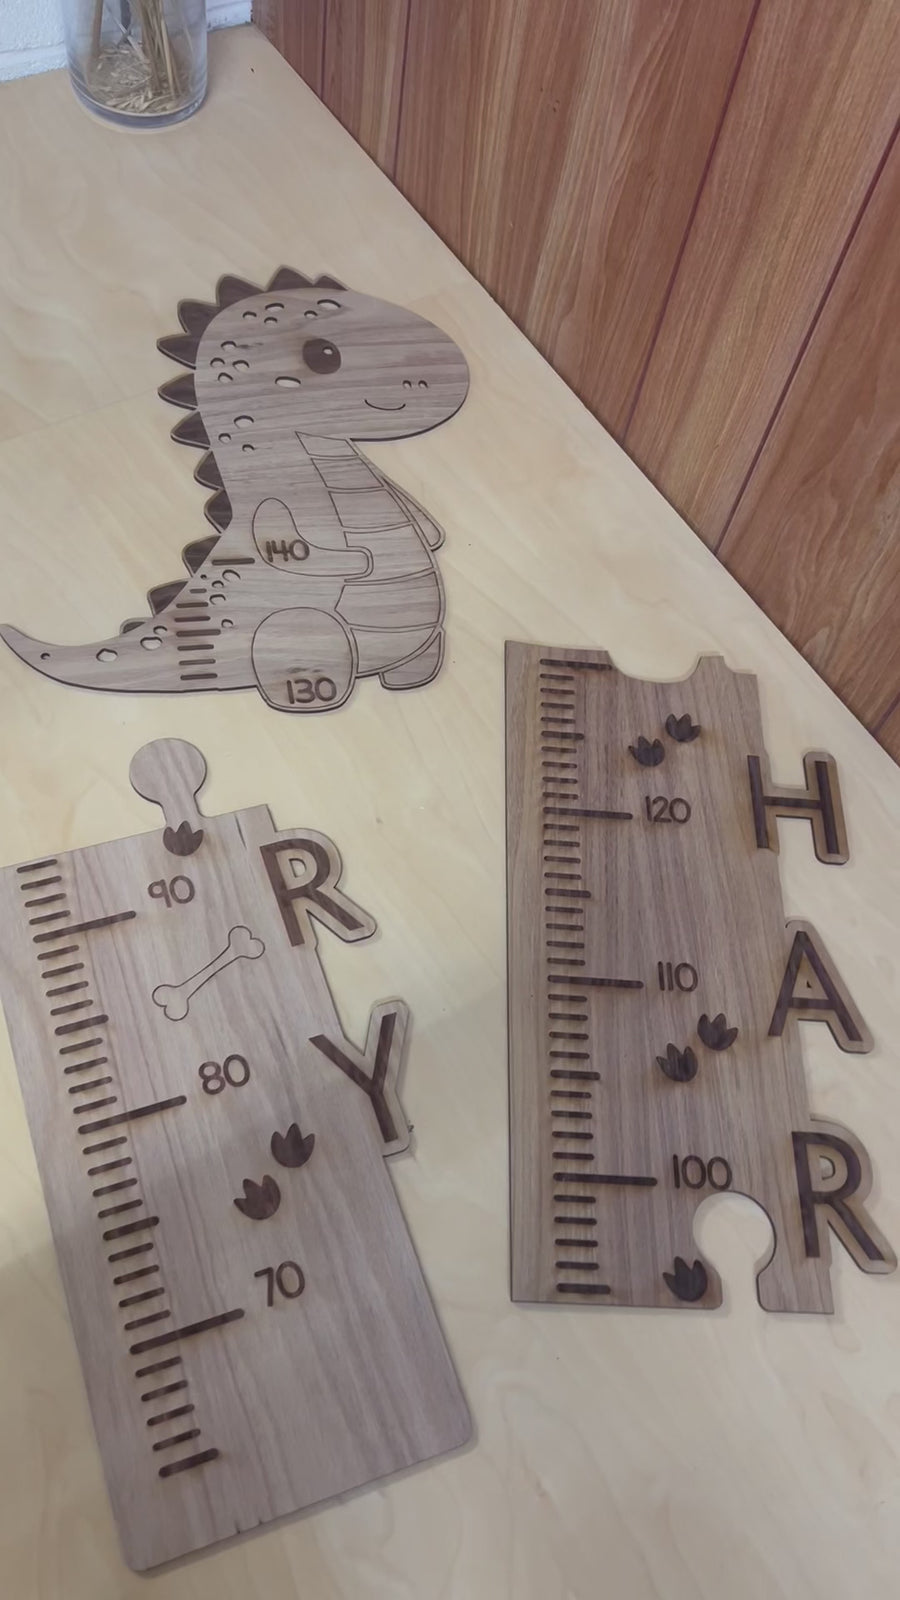 Custom Made 3D Name Wooden Animals, Truck Cartoon Height Chart, Personalised Engraved Family Growth Metric Ruler Record, Nursery Wall Decor